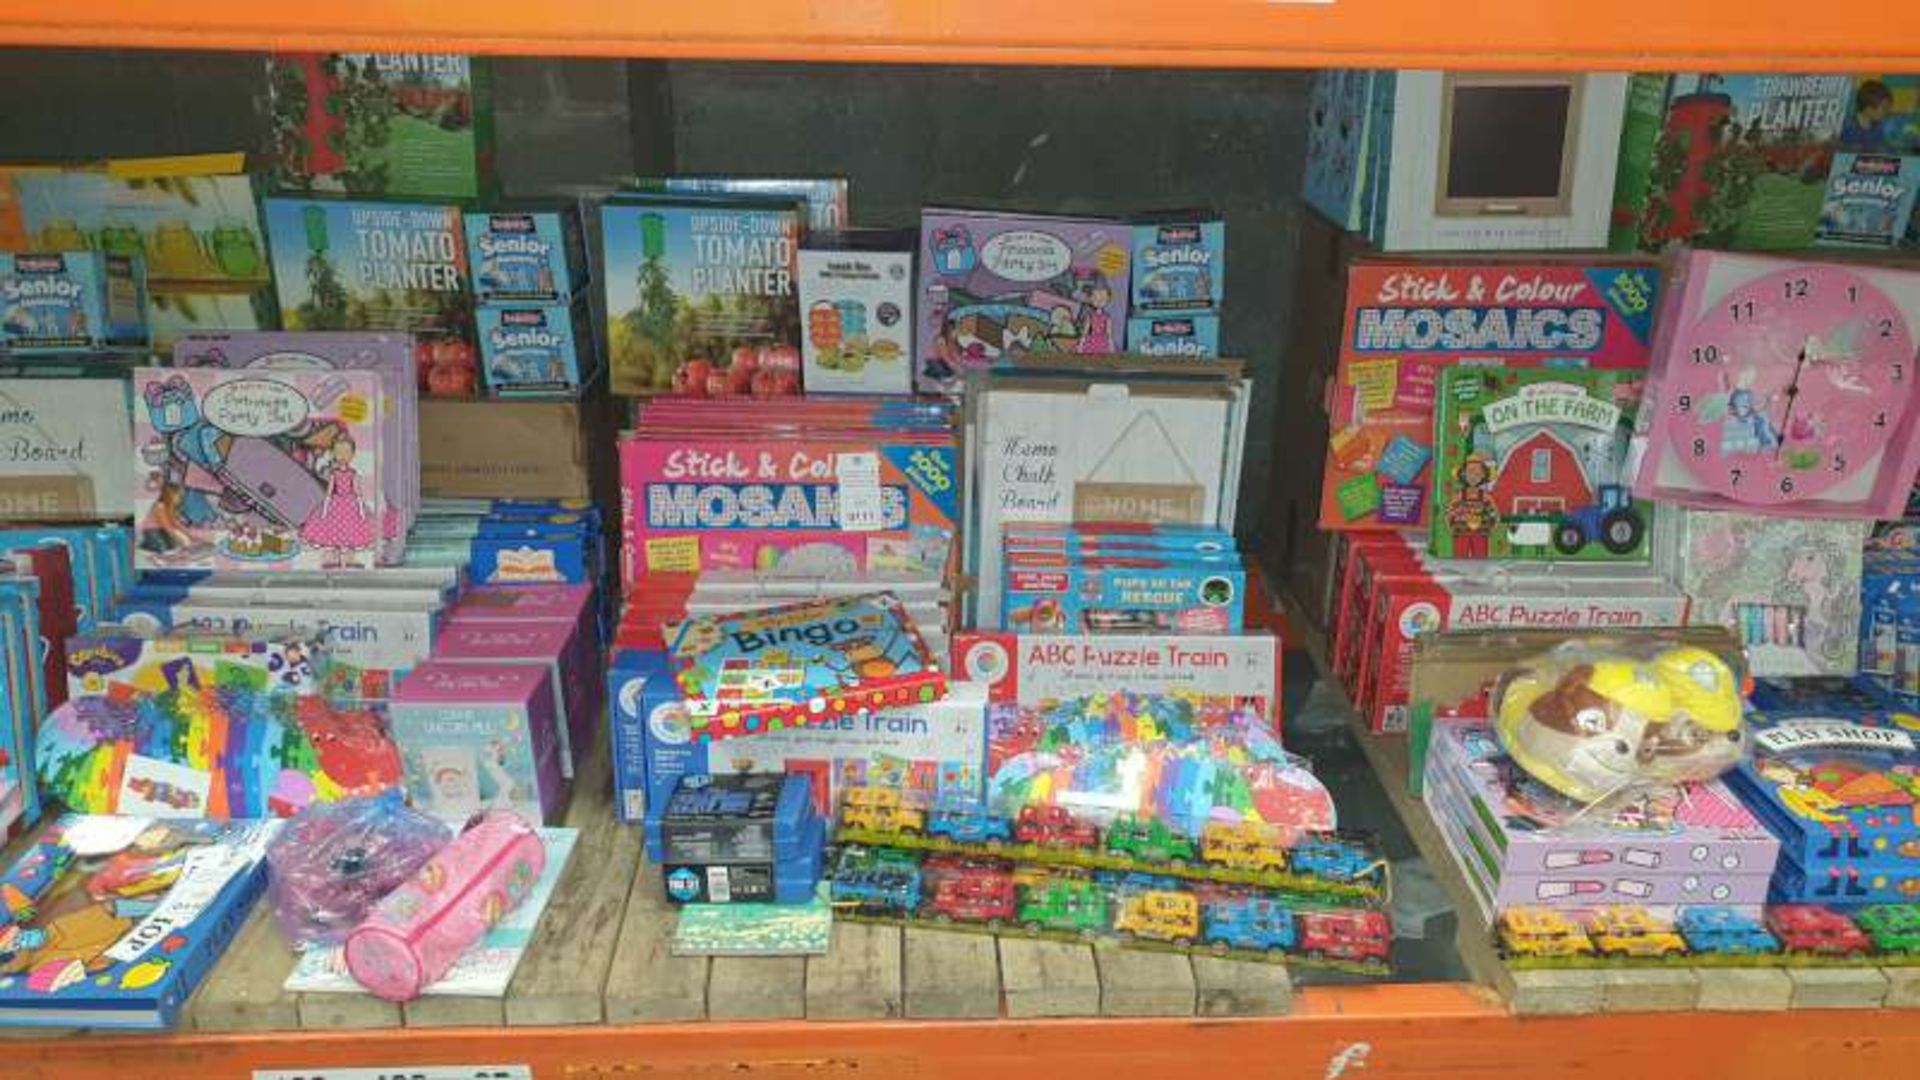 MIXED LOT CONTAINING SILLY SAFARI BINGO, ABC PUZZLE TRAINS, MEMO CHALK BOARDS, PULL BACK AND GO